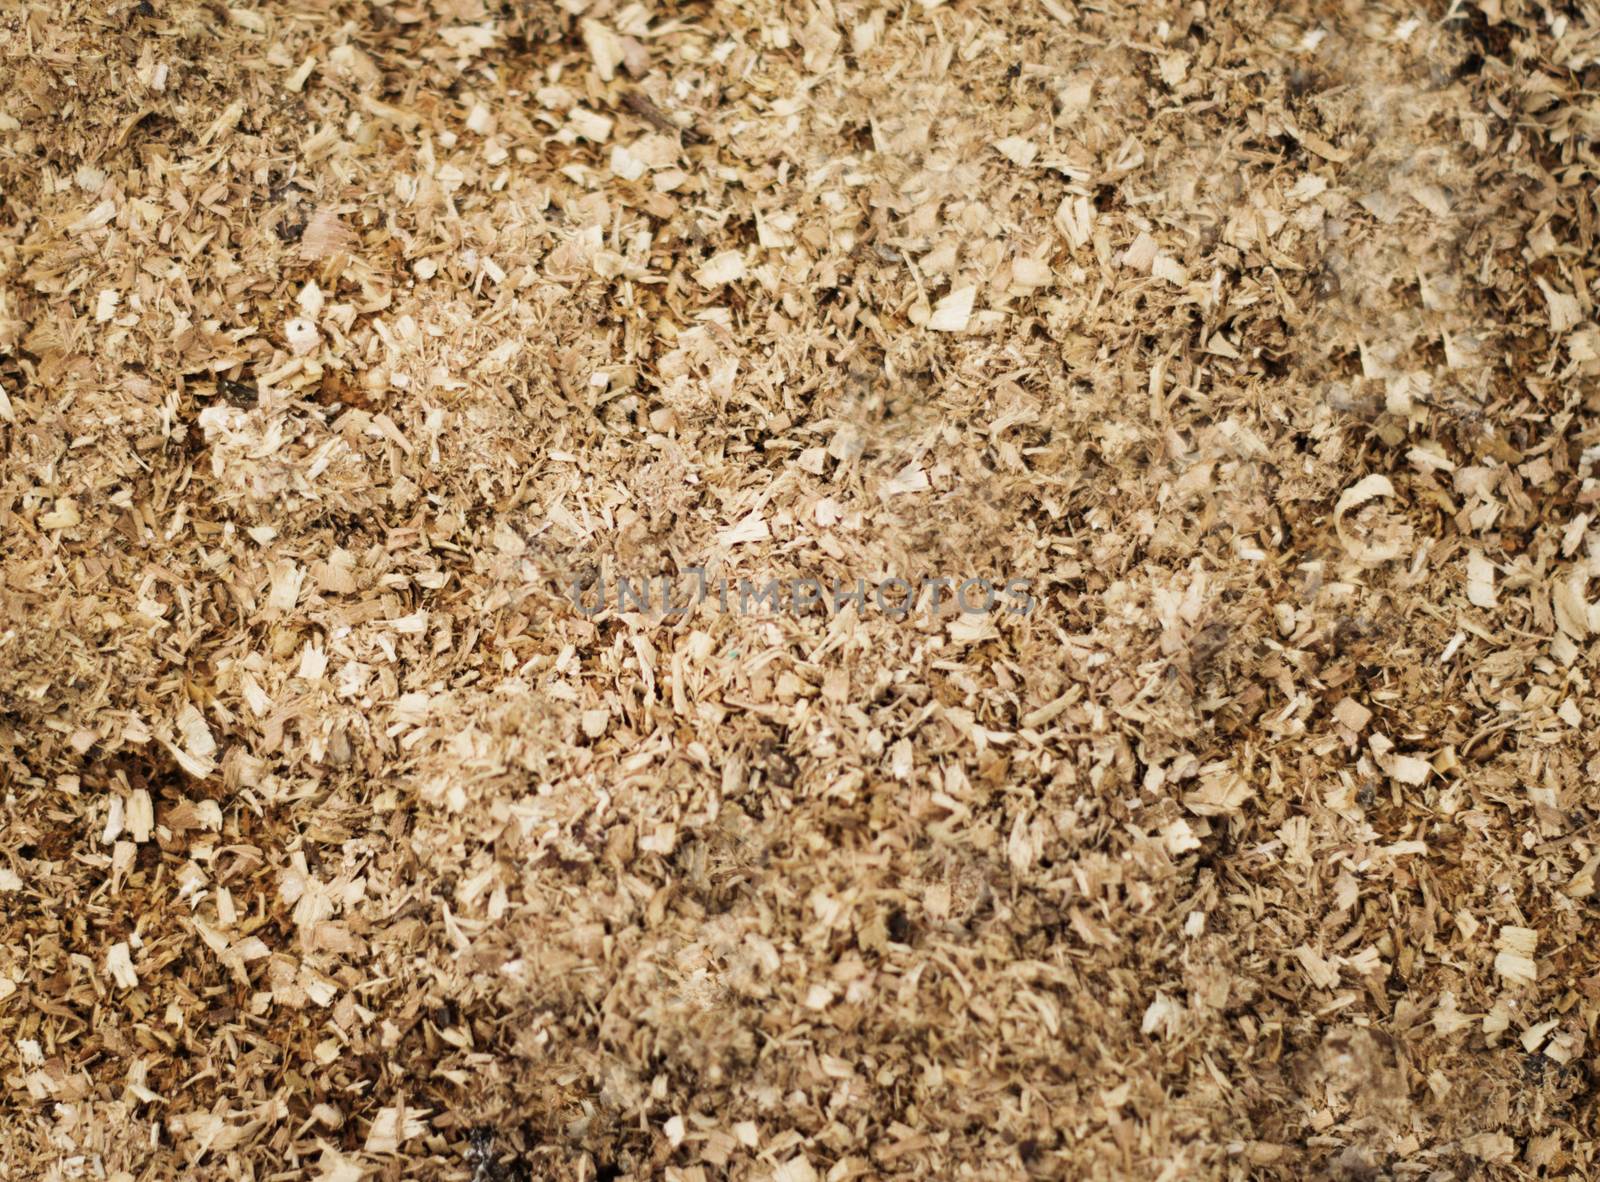 Wood Sawdust Texture Background. For your commercial and editorial use. by serhii_lohvyniuk